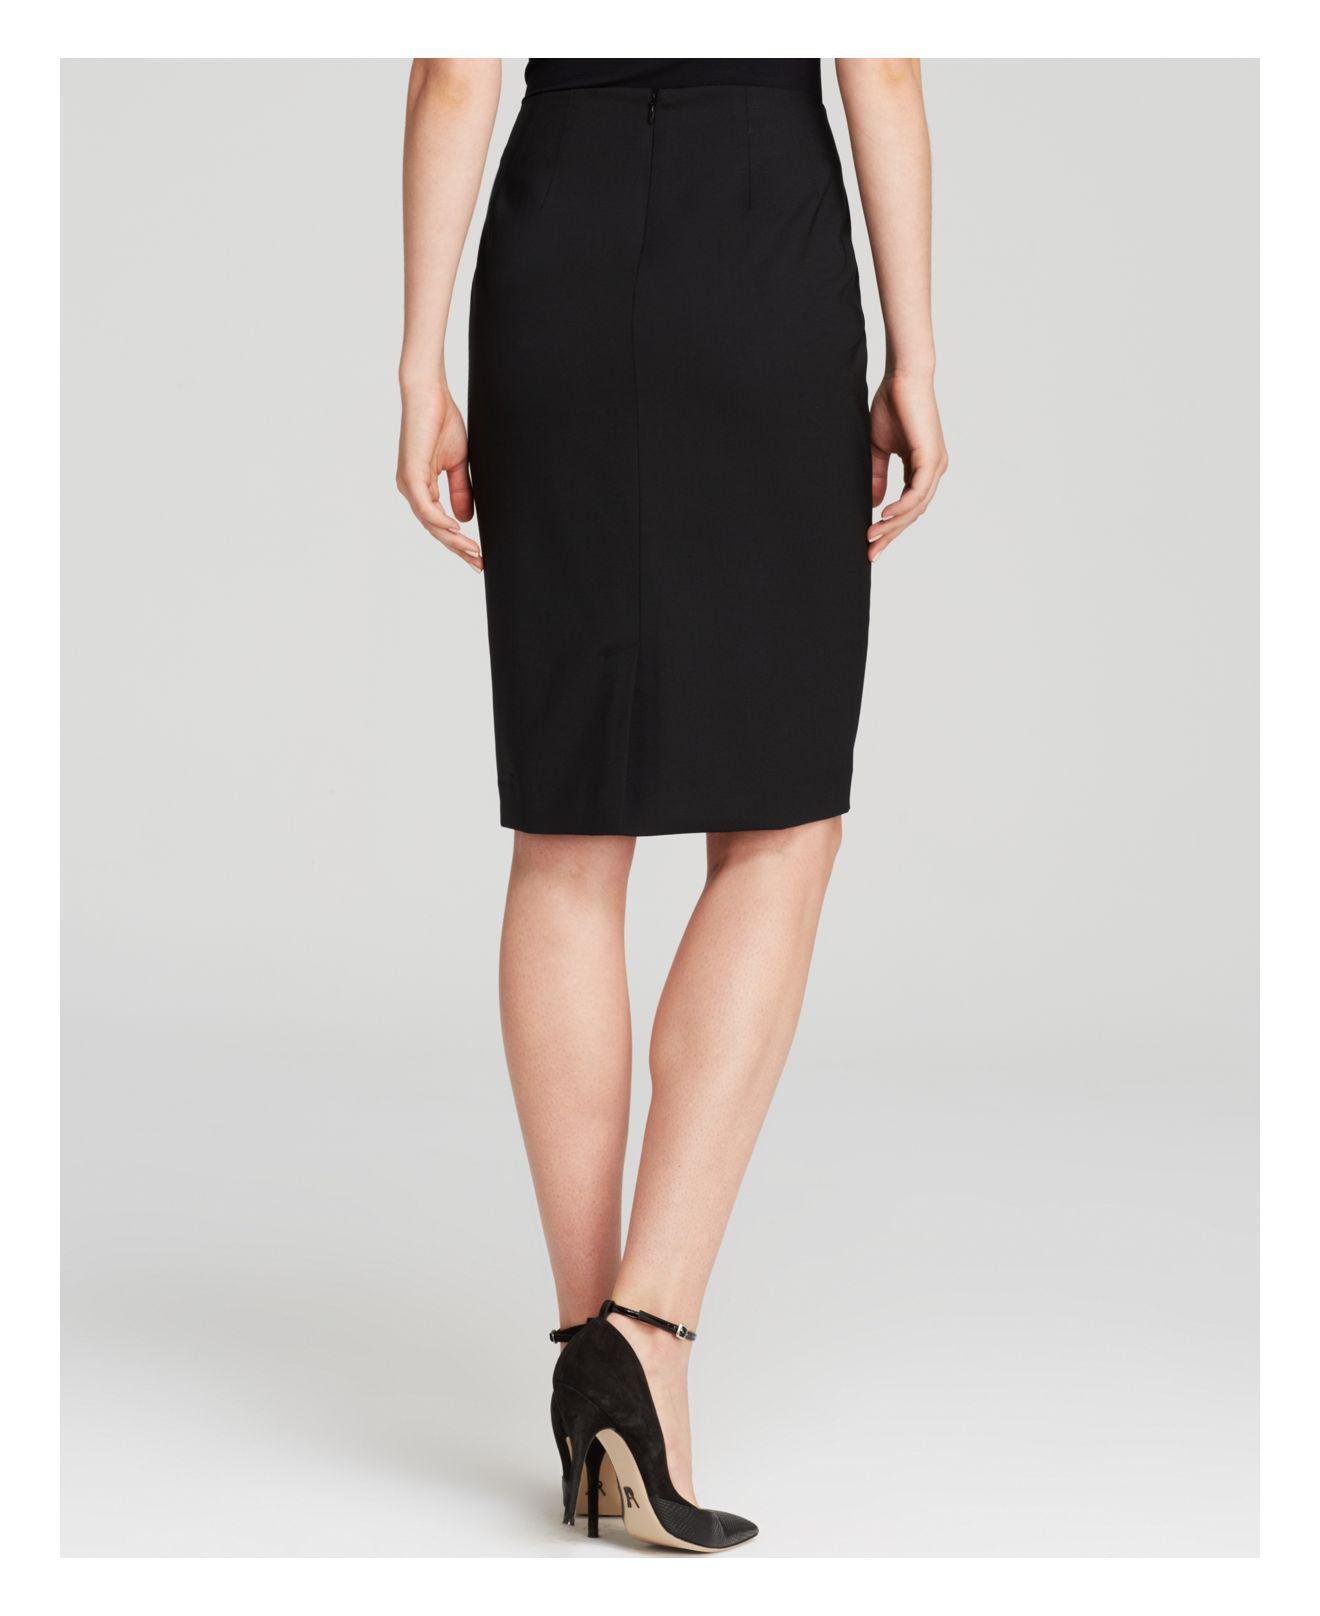 Lyst - Theory Skirt - Edition Pencil in Black